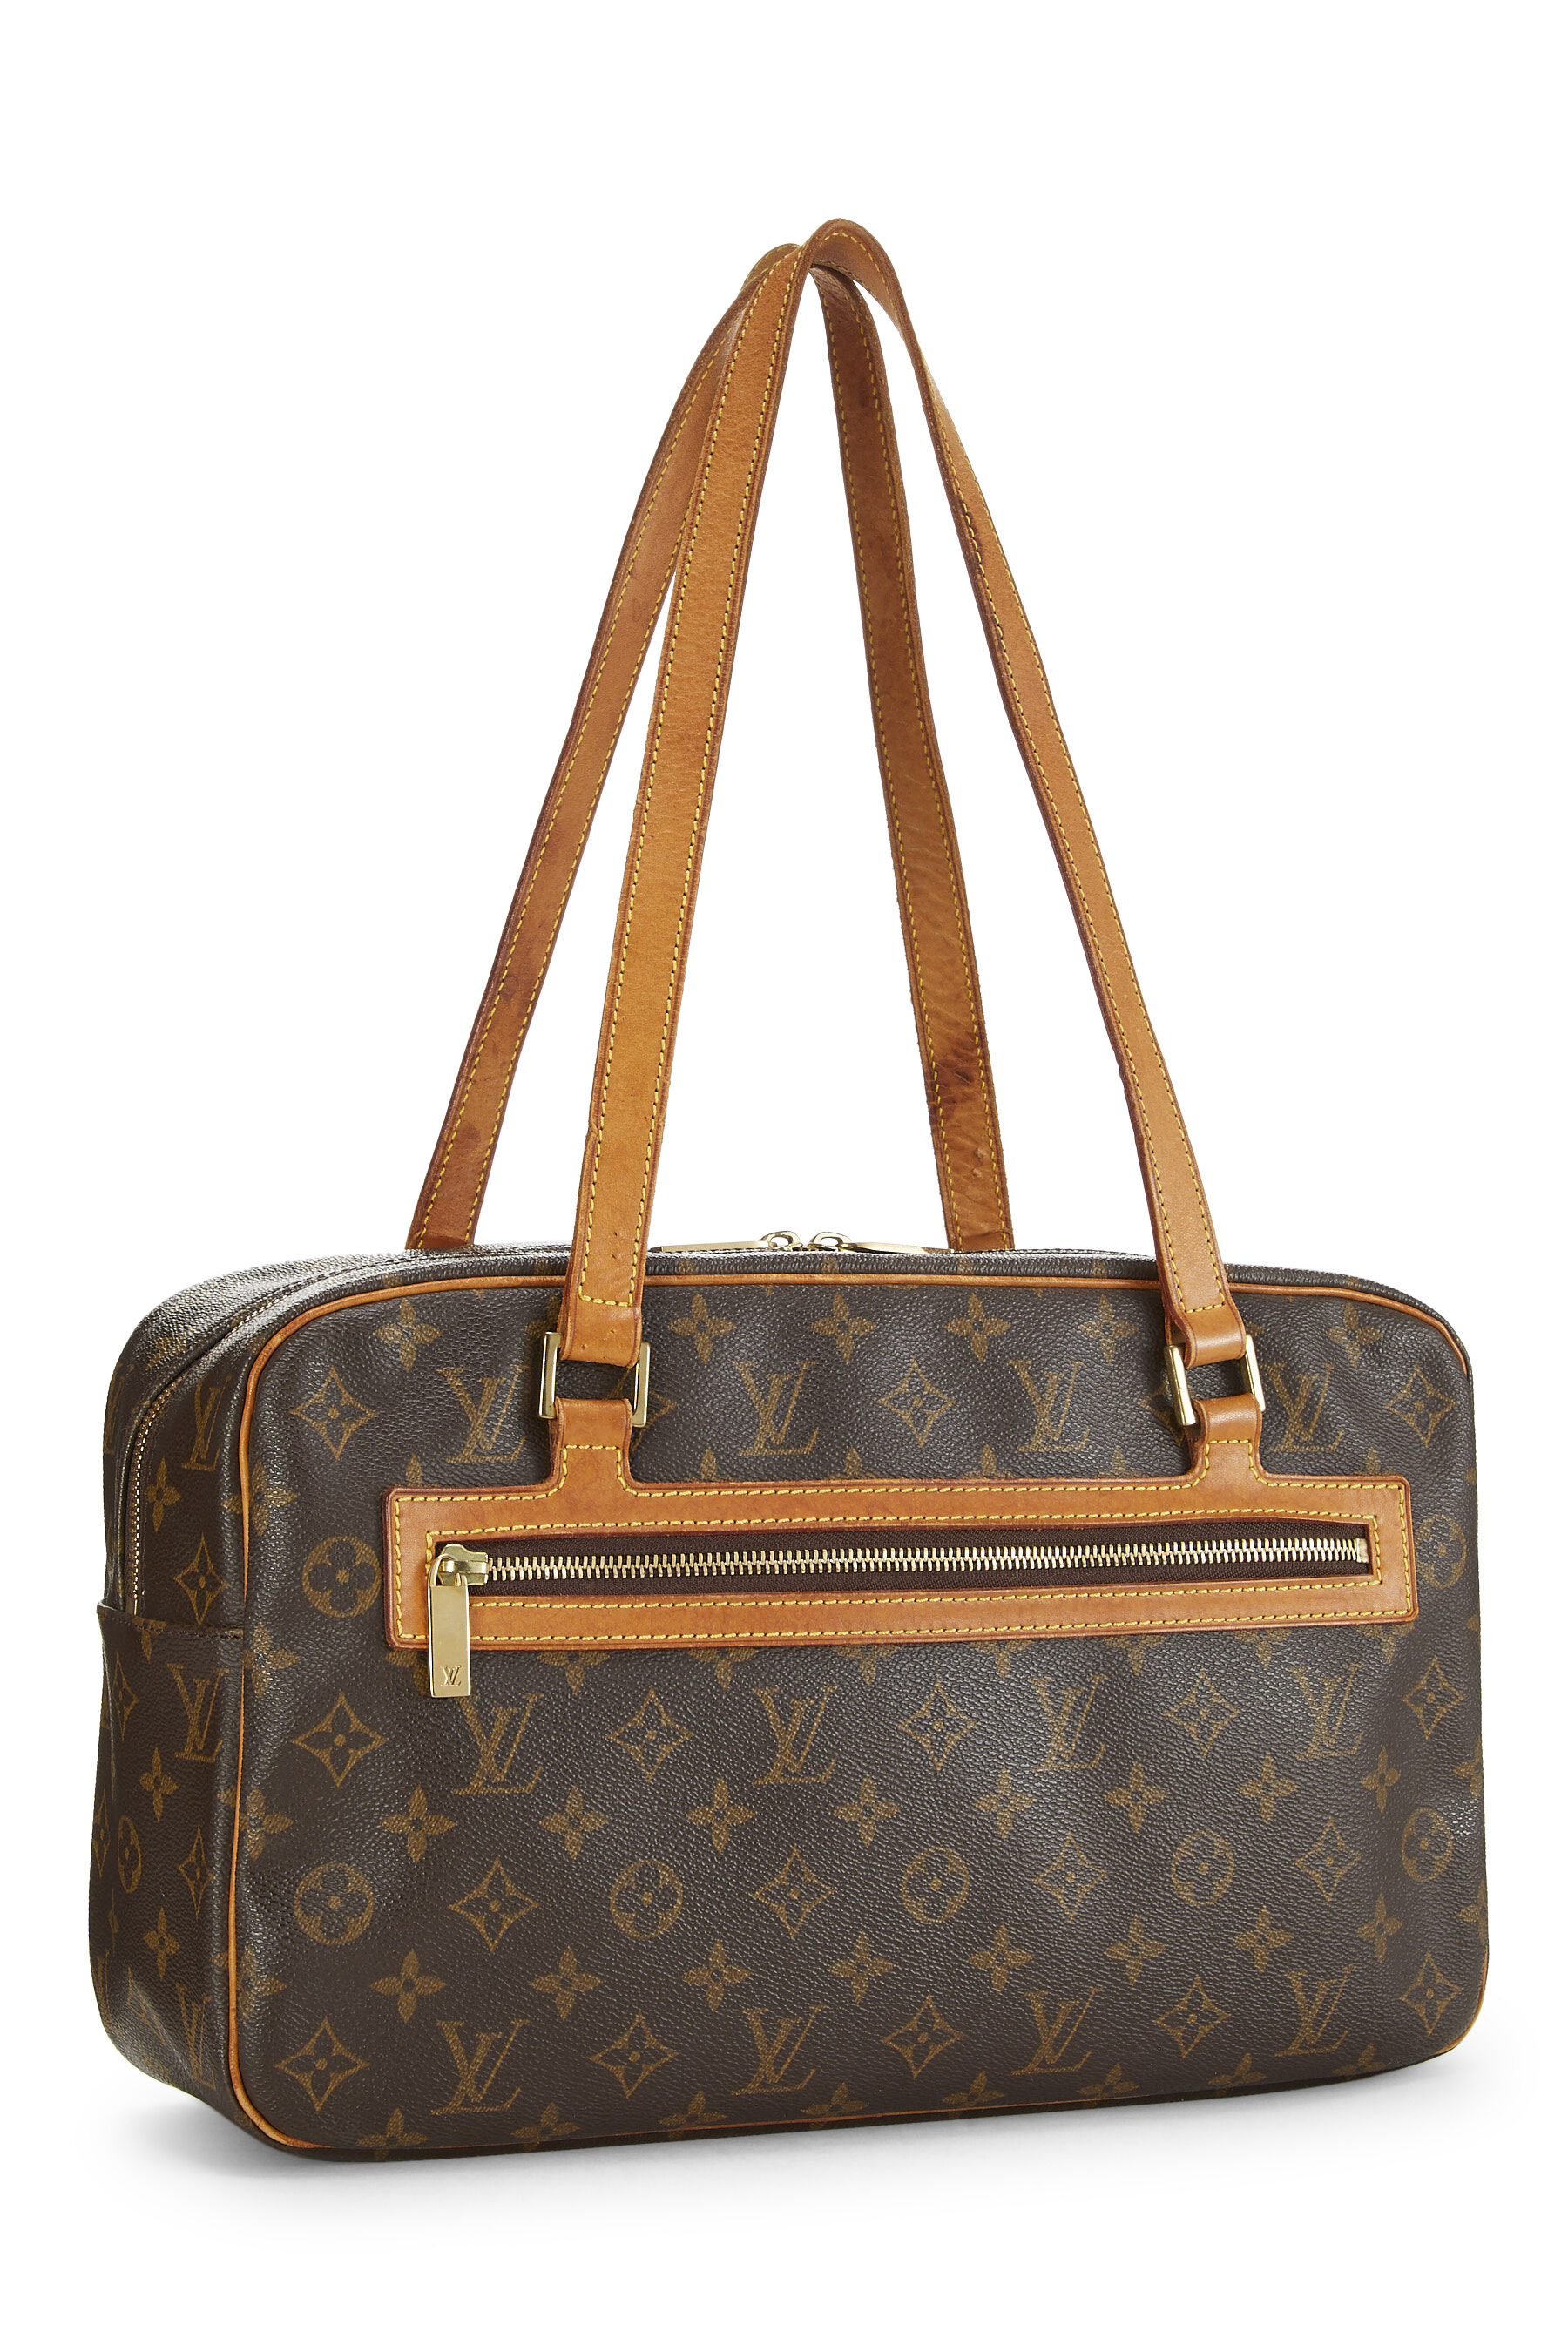 Louis Vuitton Small Bags & Handbags for Women, Authenticity Guaranteed